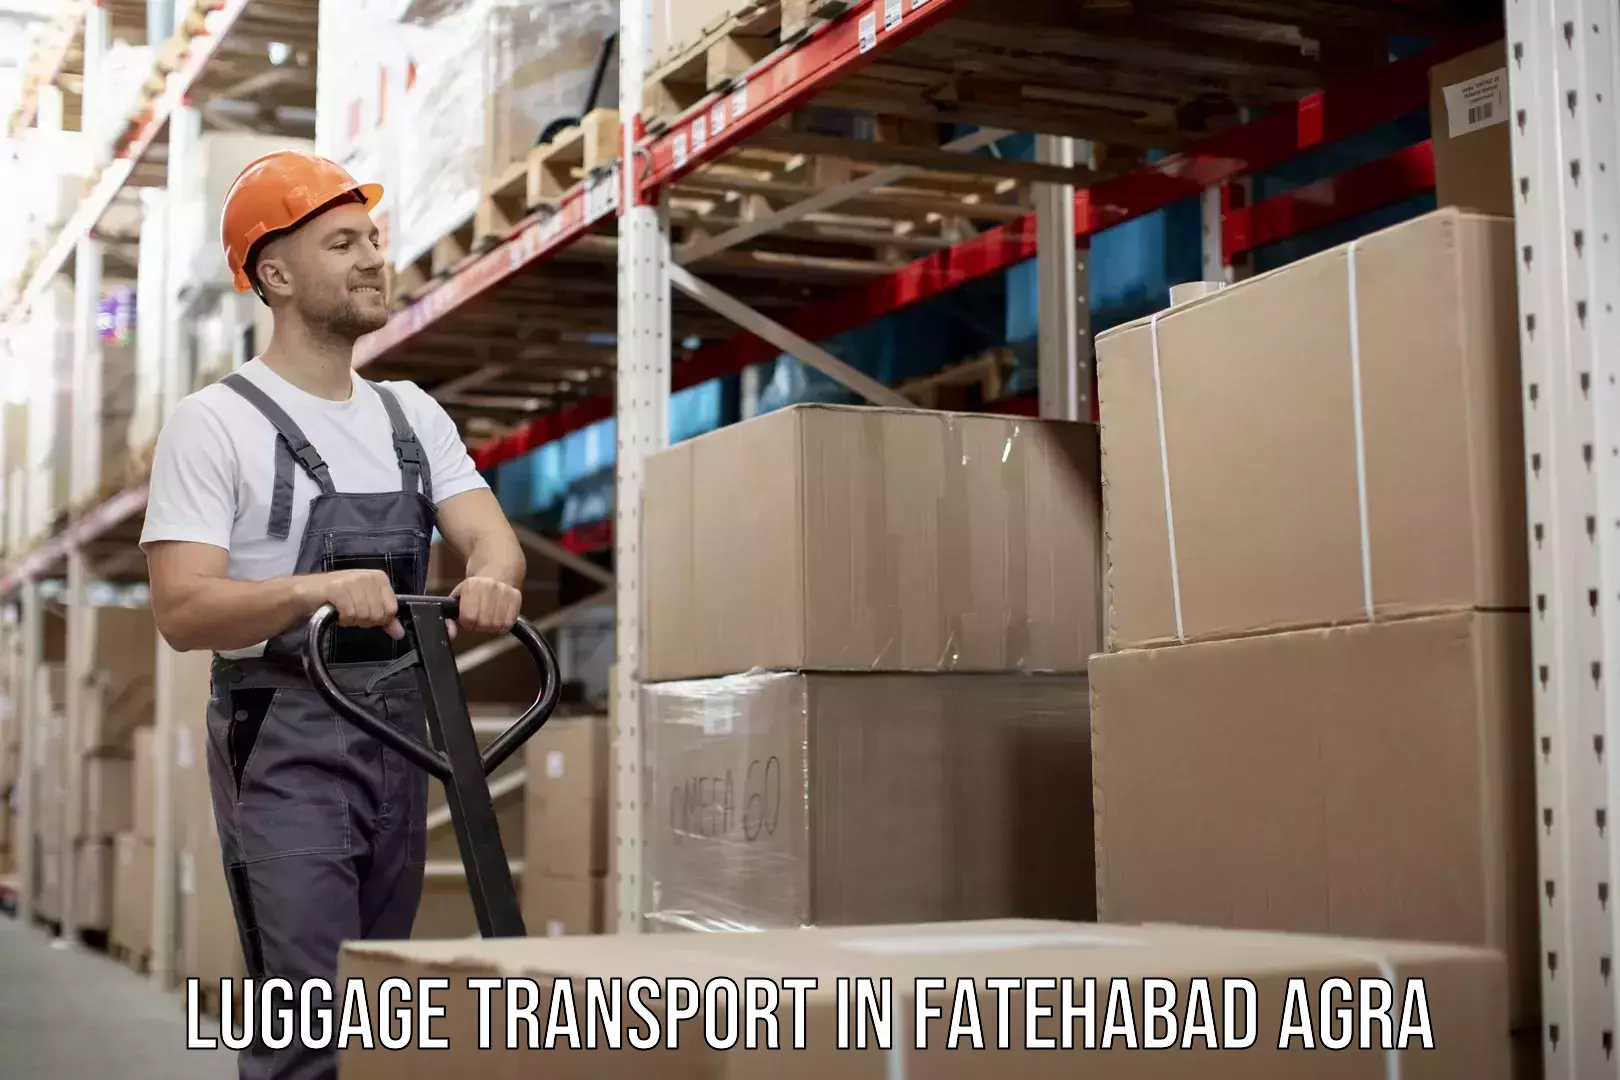 Luggage shipping specialists in Fatehabad Agra